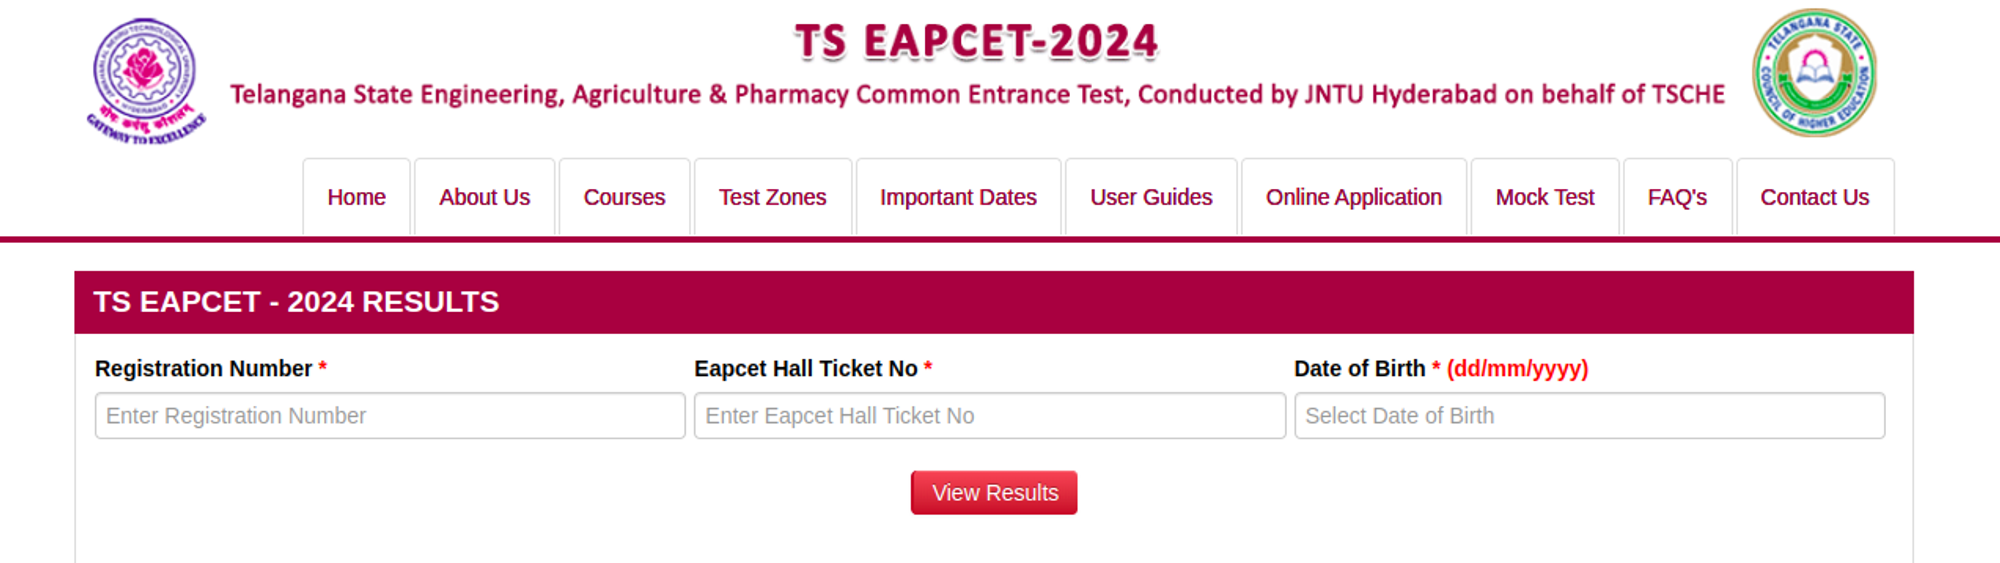 Telangana State Engineering, Agriculture, and Pharmacy Common Entrance Test (TS EAPCET) 2024 Results Declared